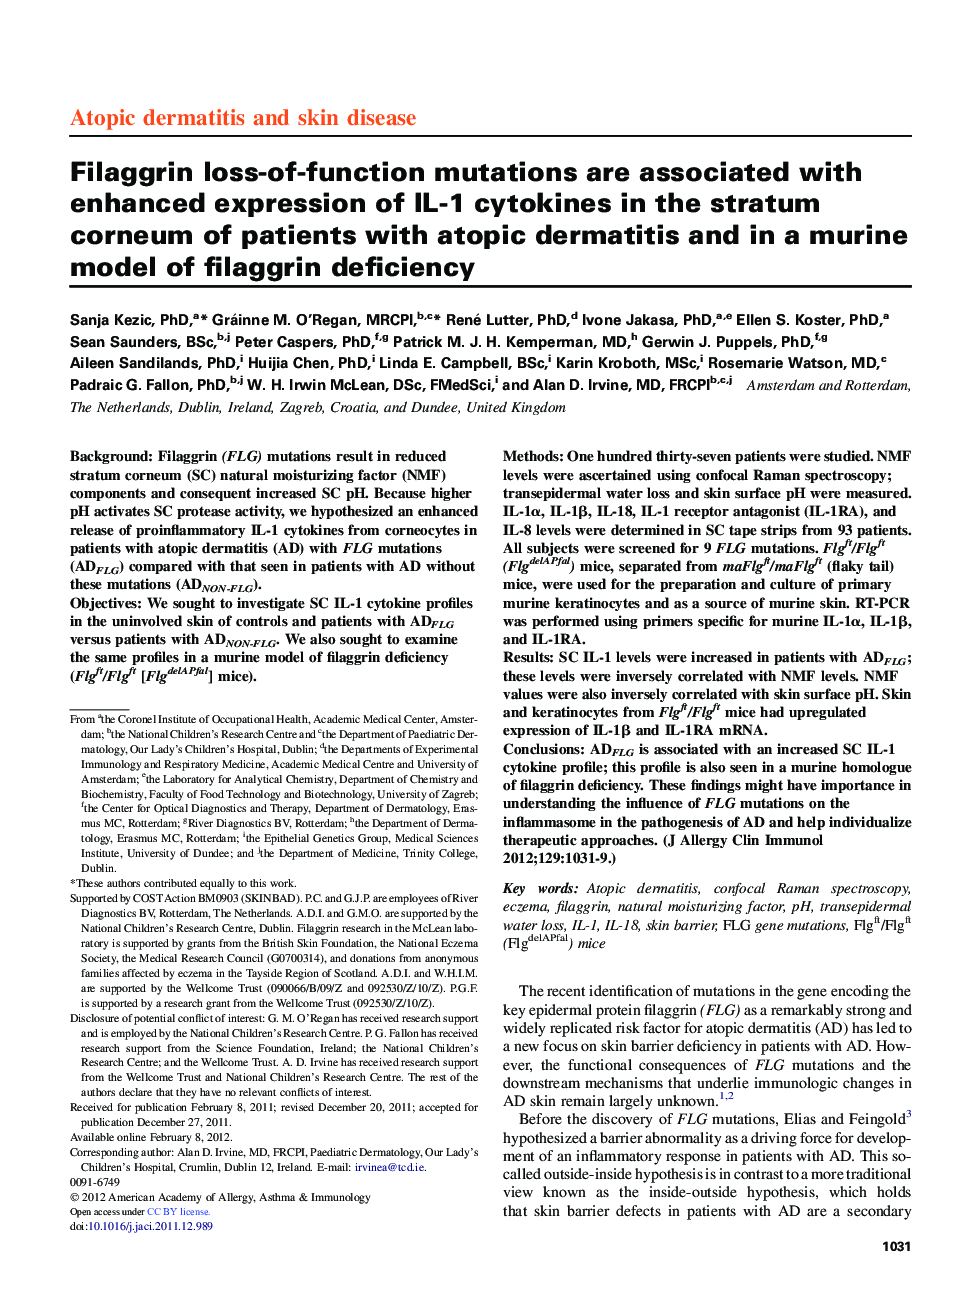 Atopic dermatitis and skin diseaseFilaggrin loss-of-function mutations are associated with enhanced expression of IL-1 cytokines in the stratum corneum of patients with atopic dermatitis and in a murine model of filaggrin deficiency